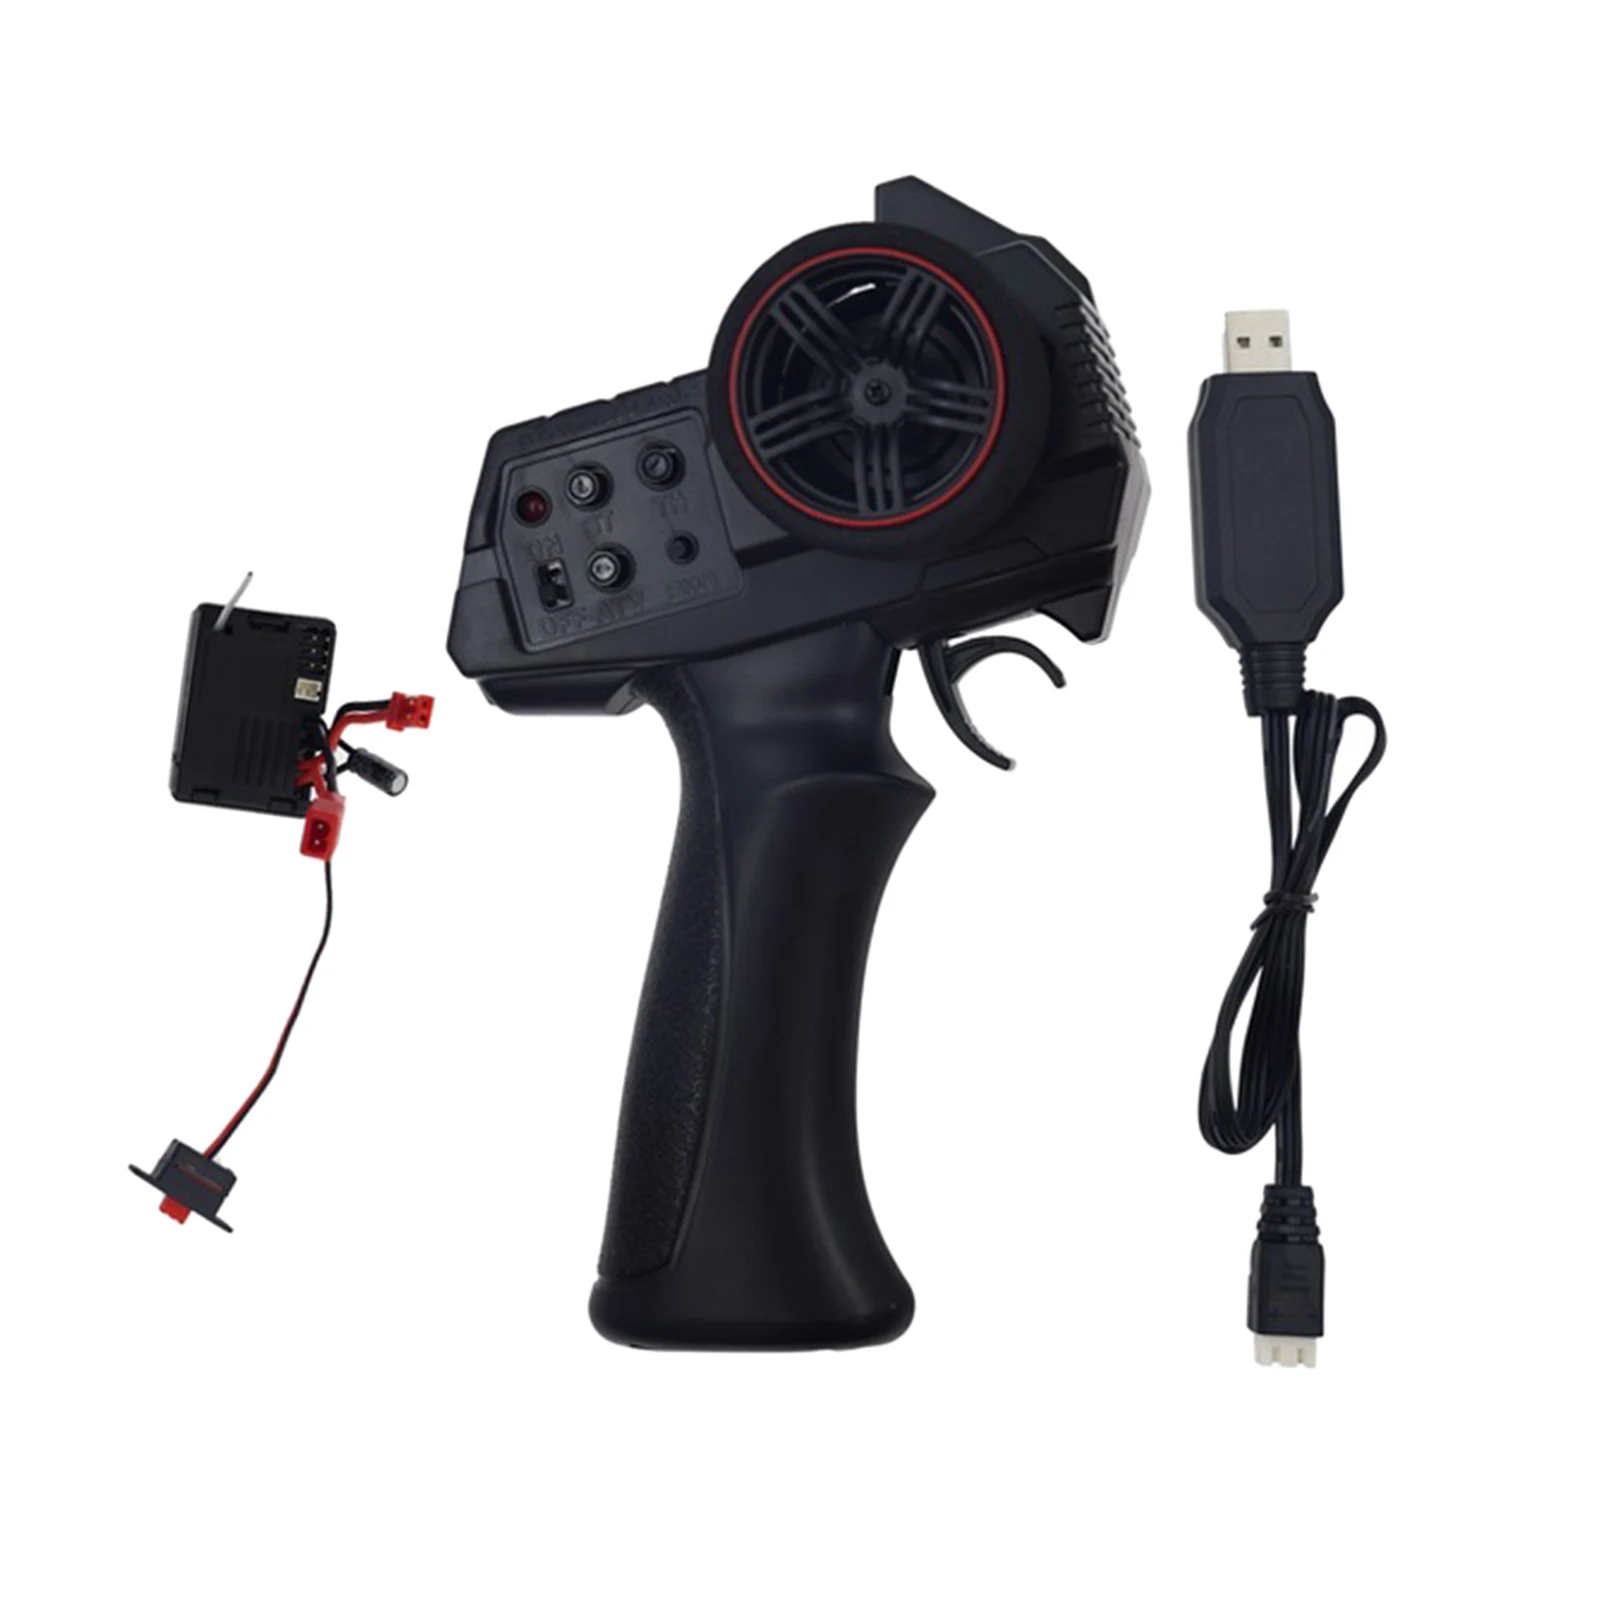 2.4G 3CH Remote Control Transmitter And Receiver Set with USB Cable RC Parts